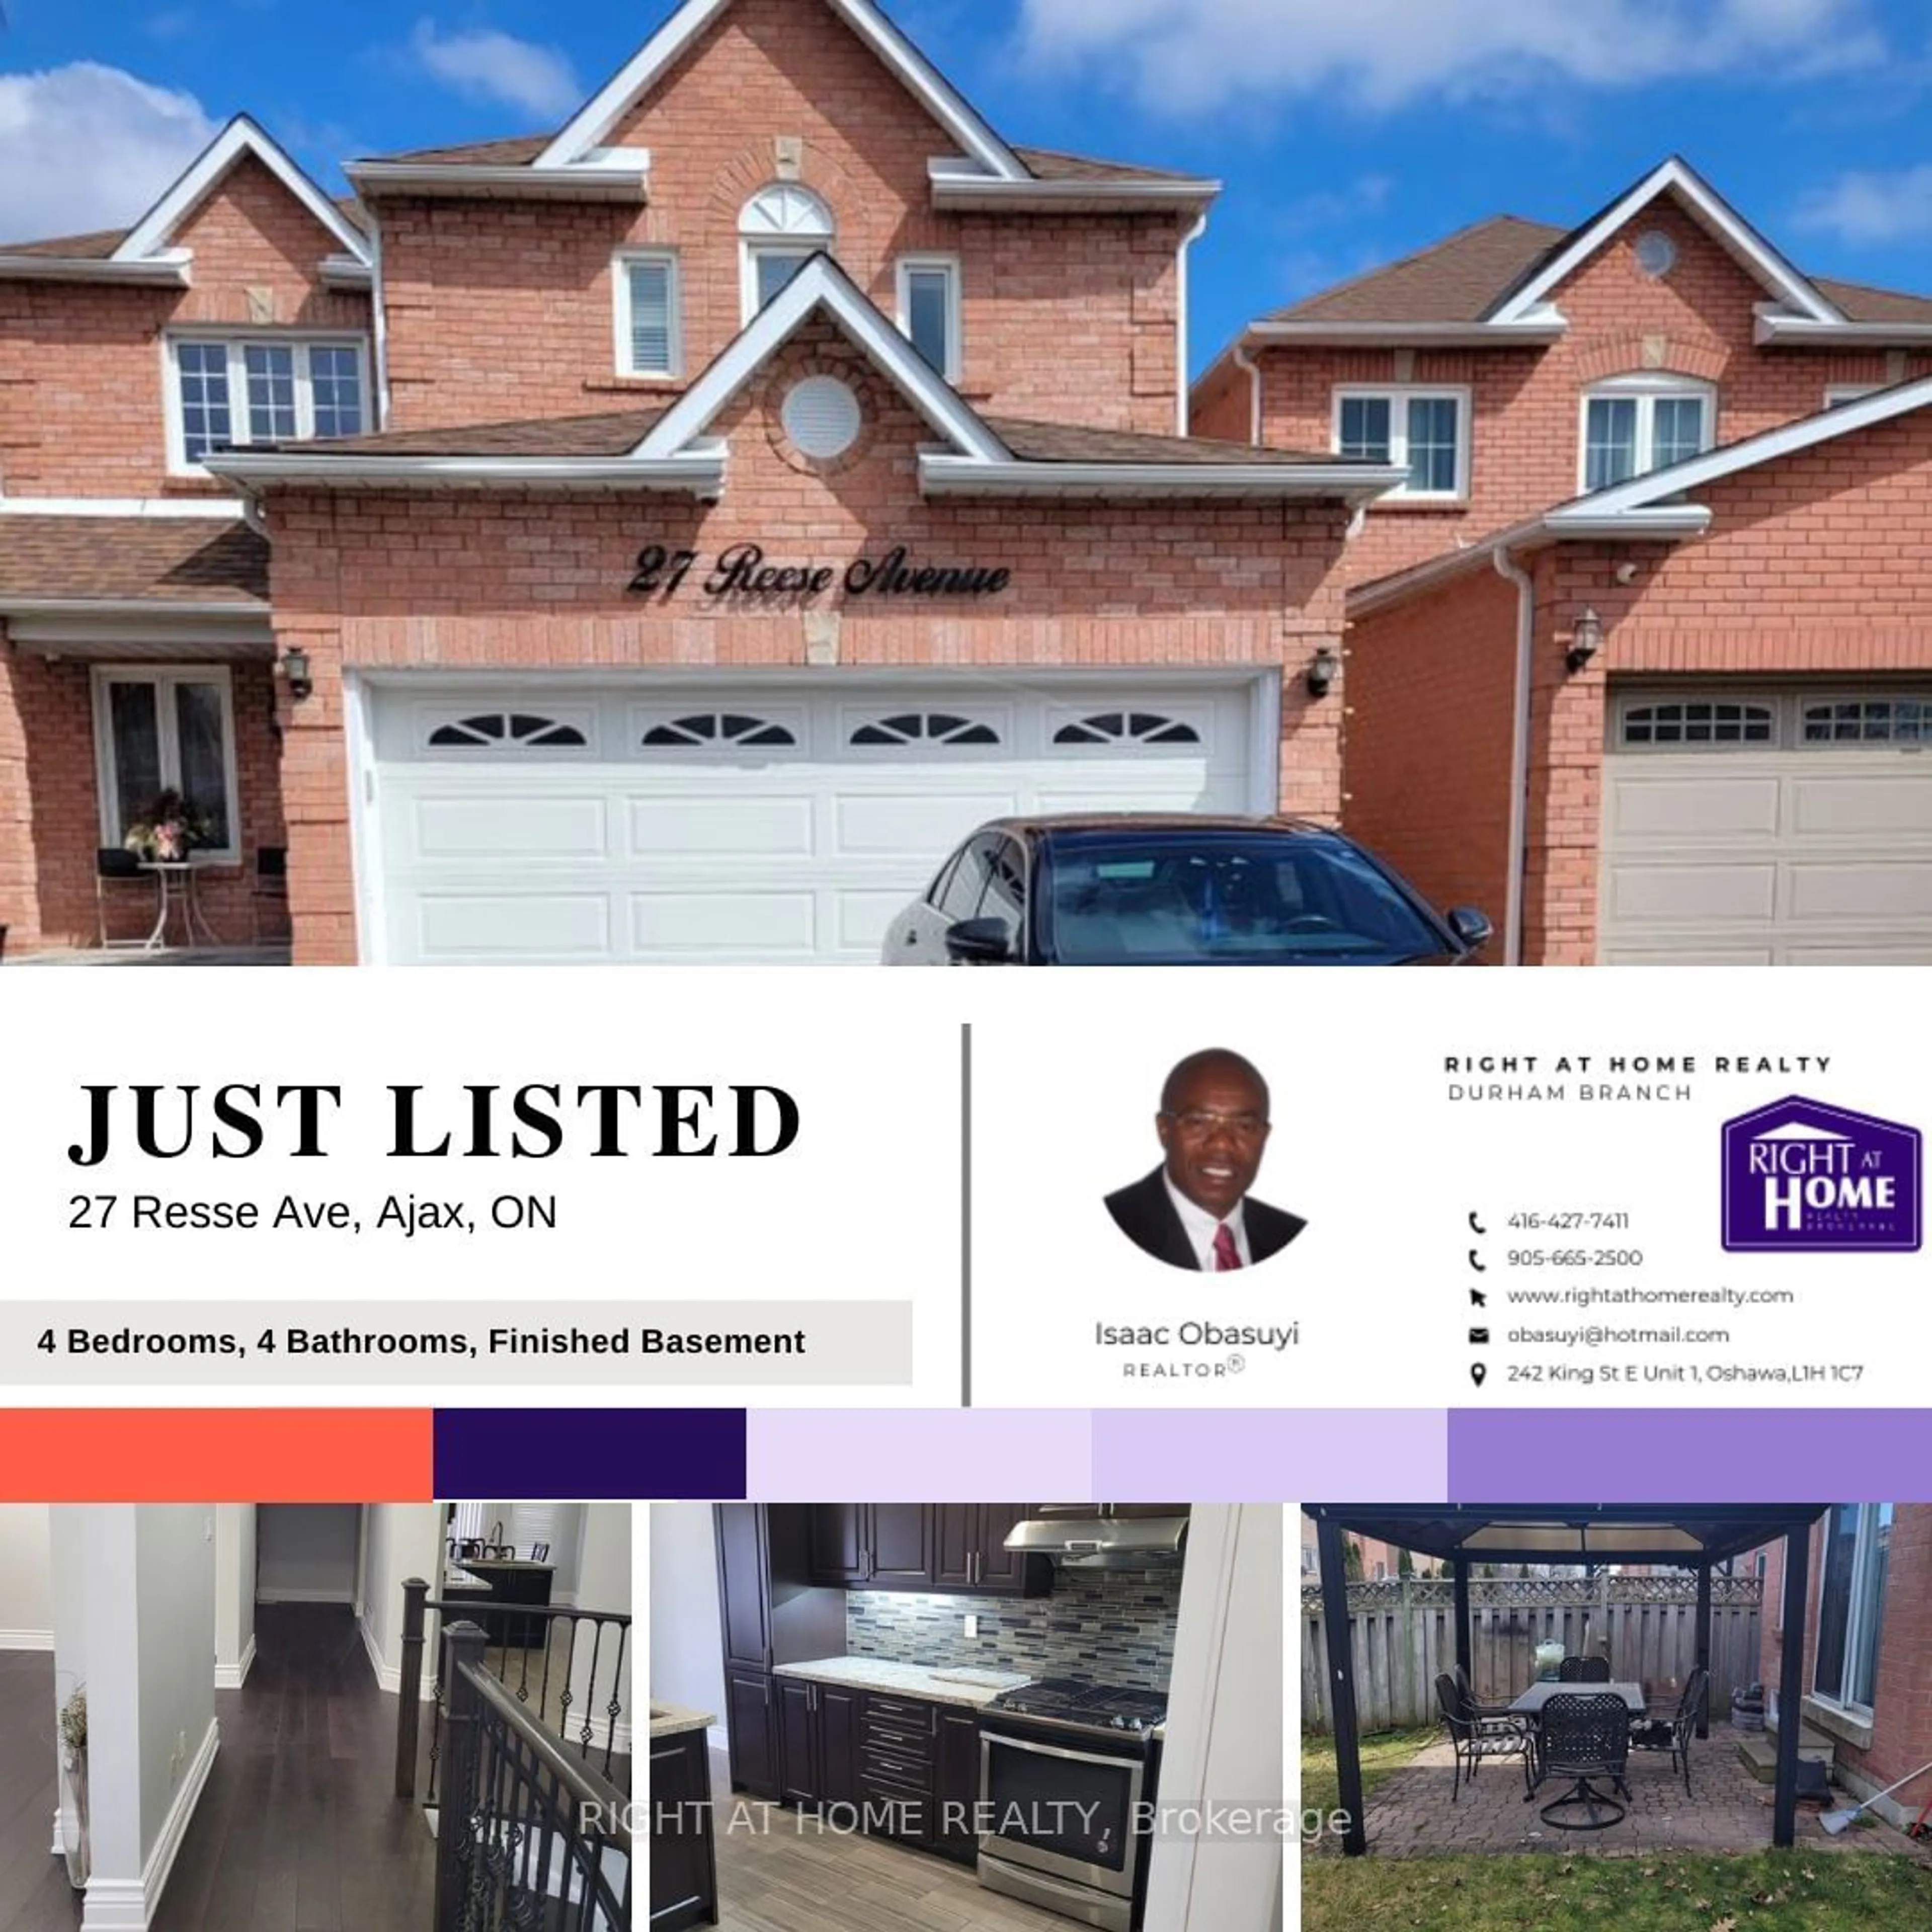 Home with brick exterior material for 27 Reese Ave, Ajax Ontario L1T 3V6